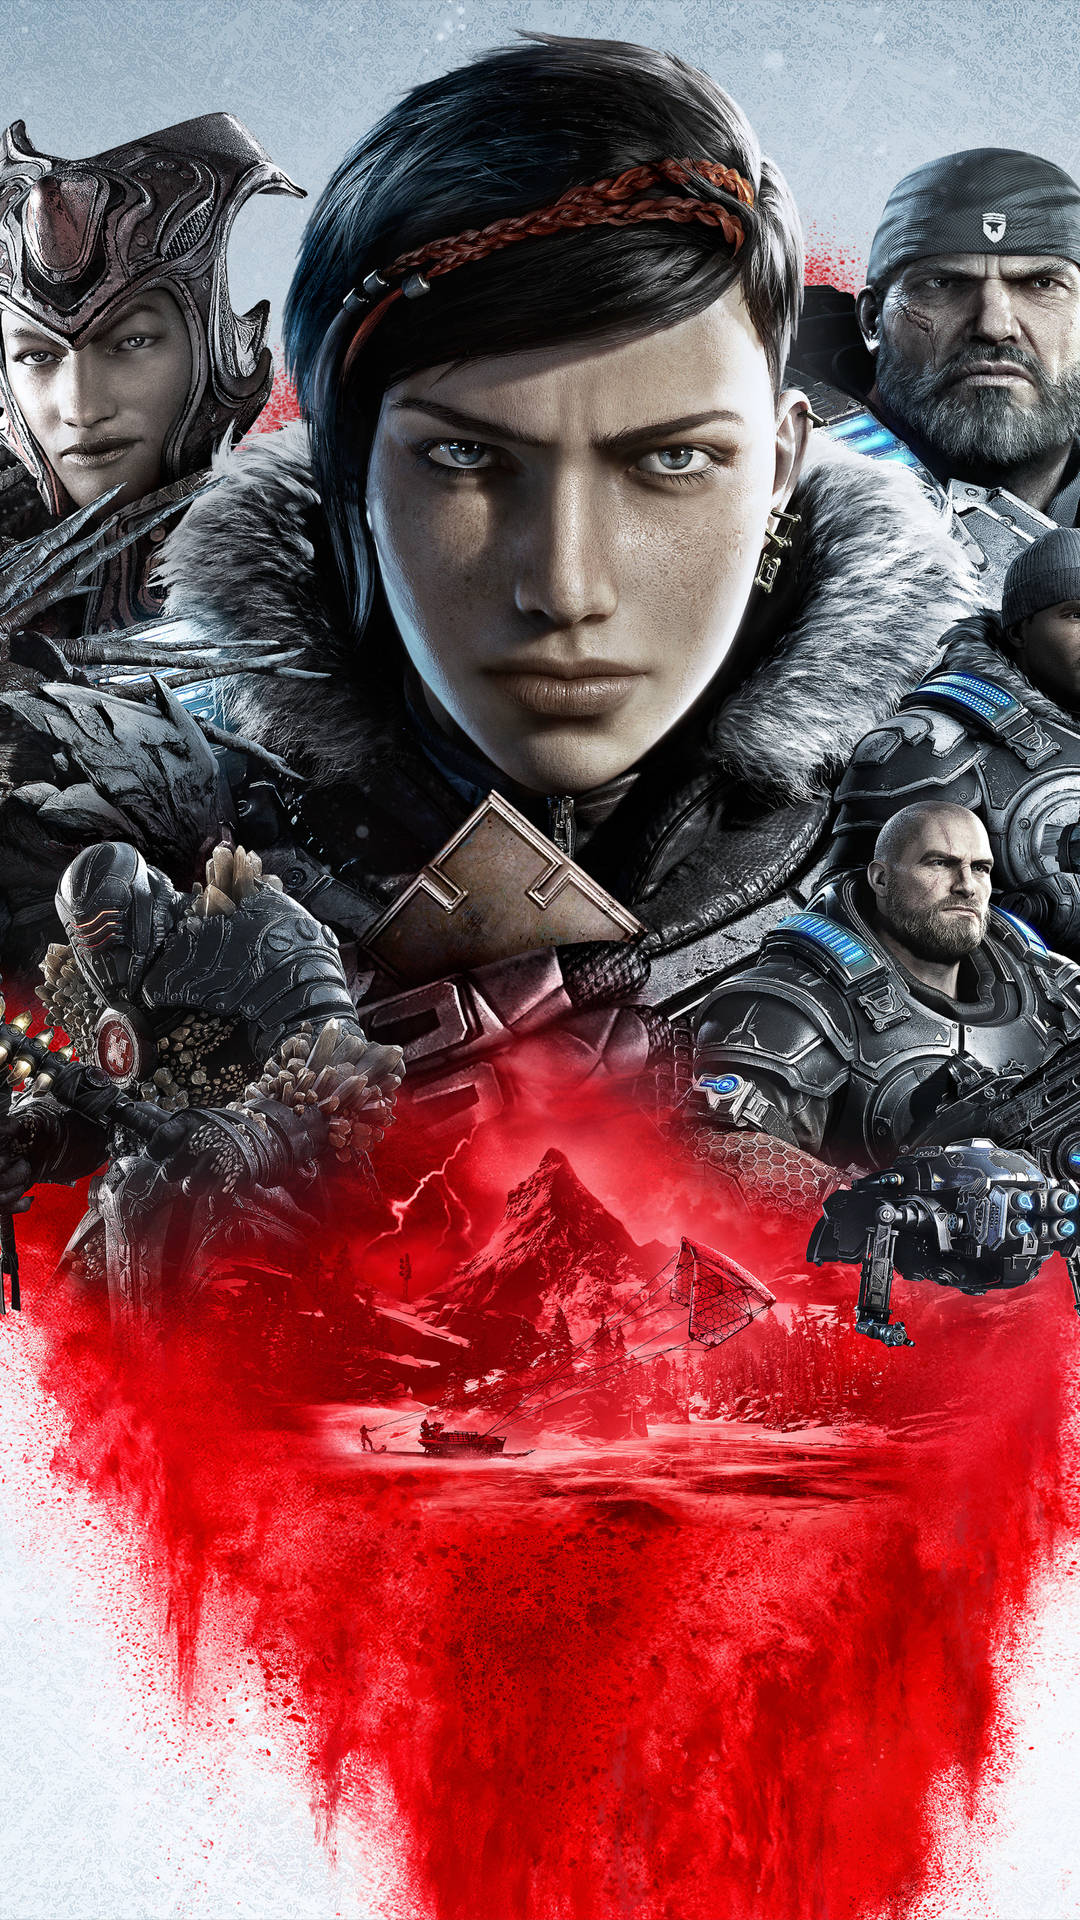 Get Ready for Epic Battle with Cool Gears of War 5 Wallpaper